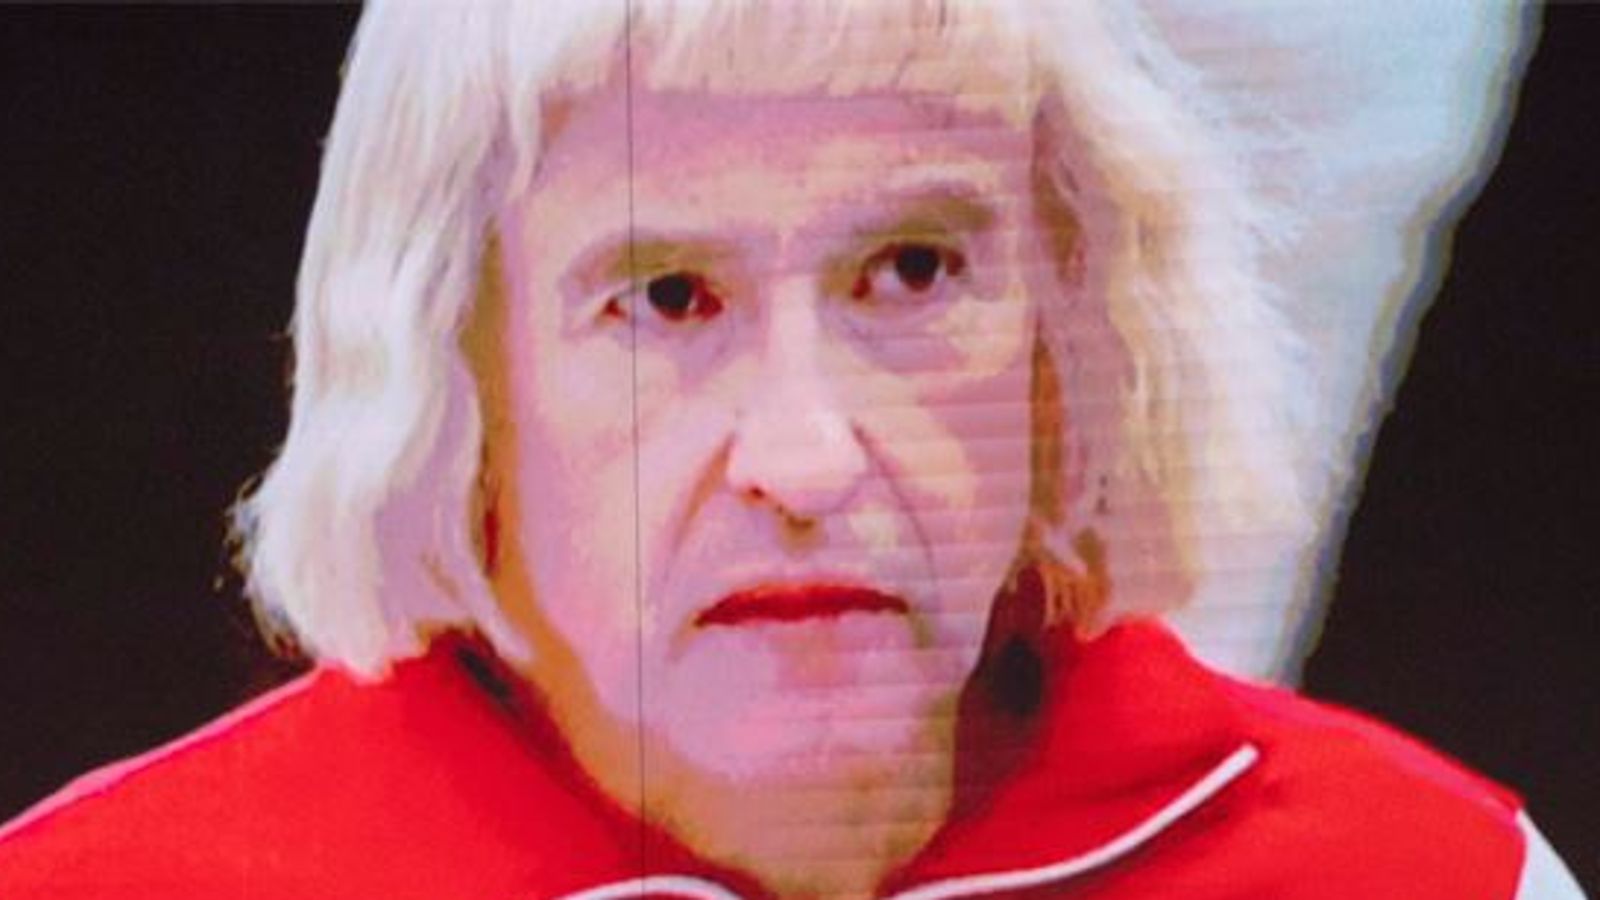 Steve Coogan hopes his portrayal of Jimmy Savile in The Reckoning will help prevent abuse